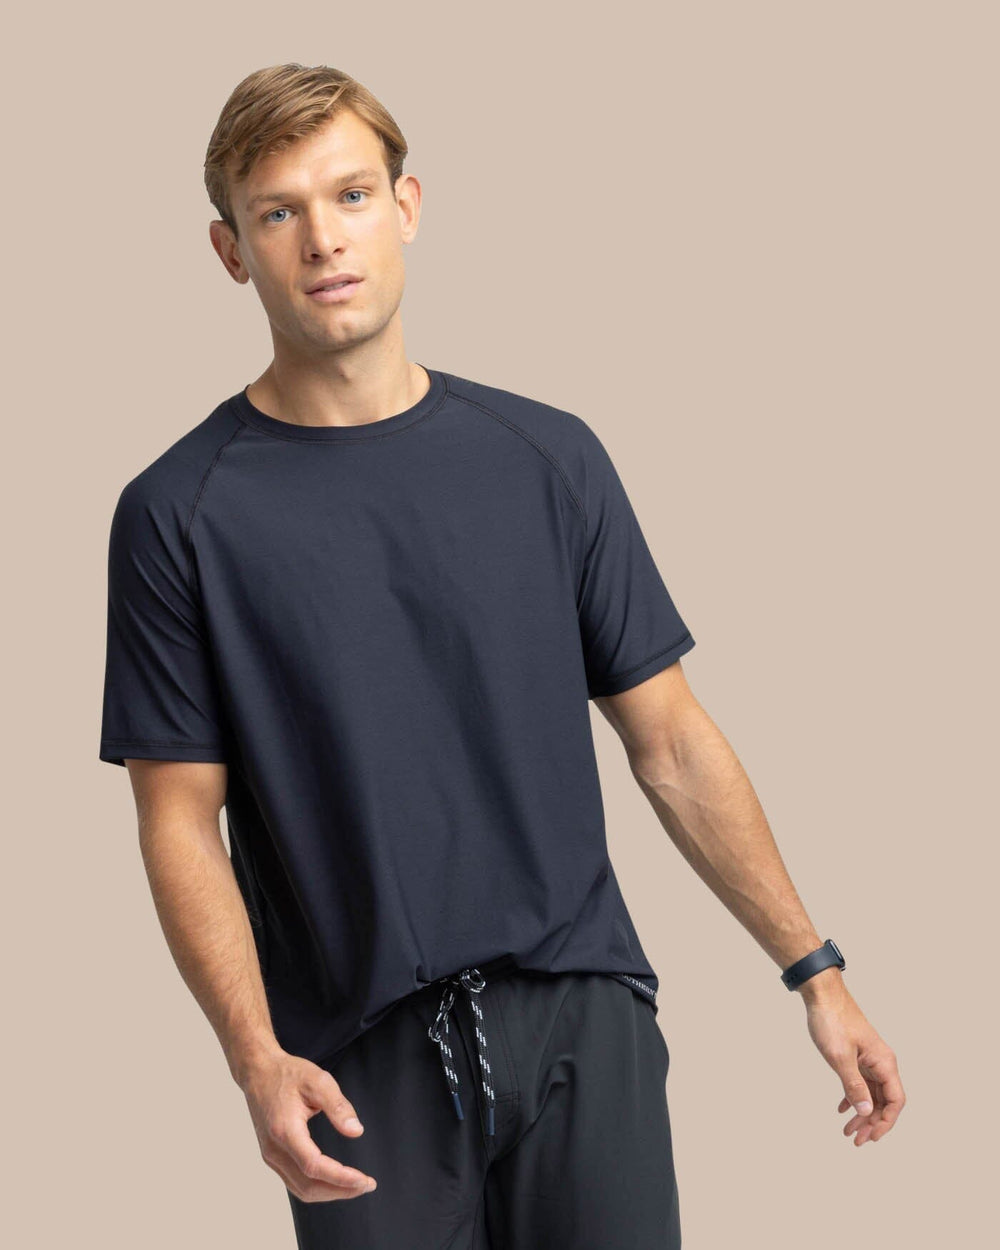 The front view of the Southern Tide brrr-illiant Performance T-Shirt by Southern Tide - Caviar Black